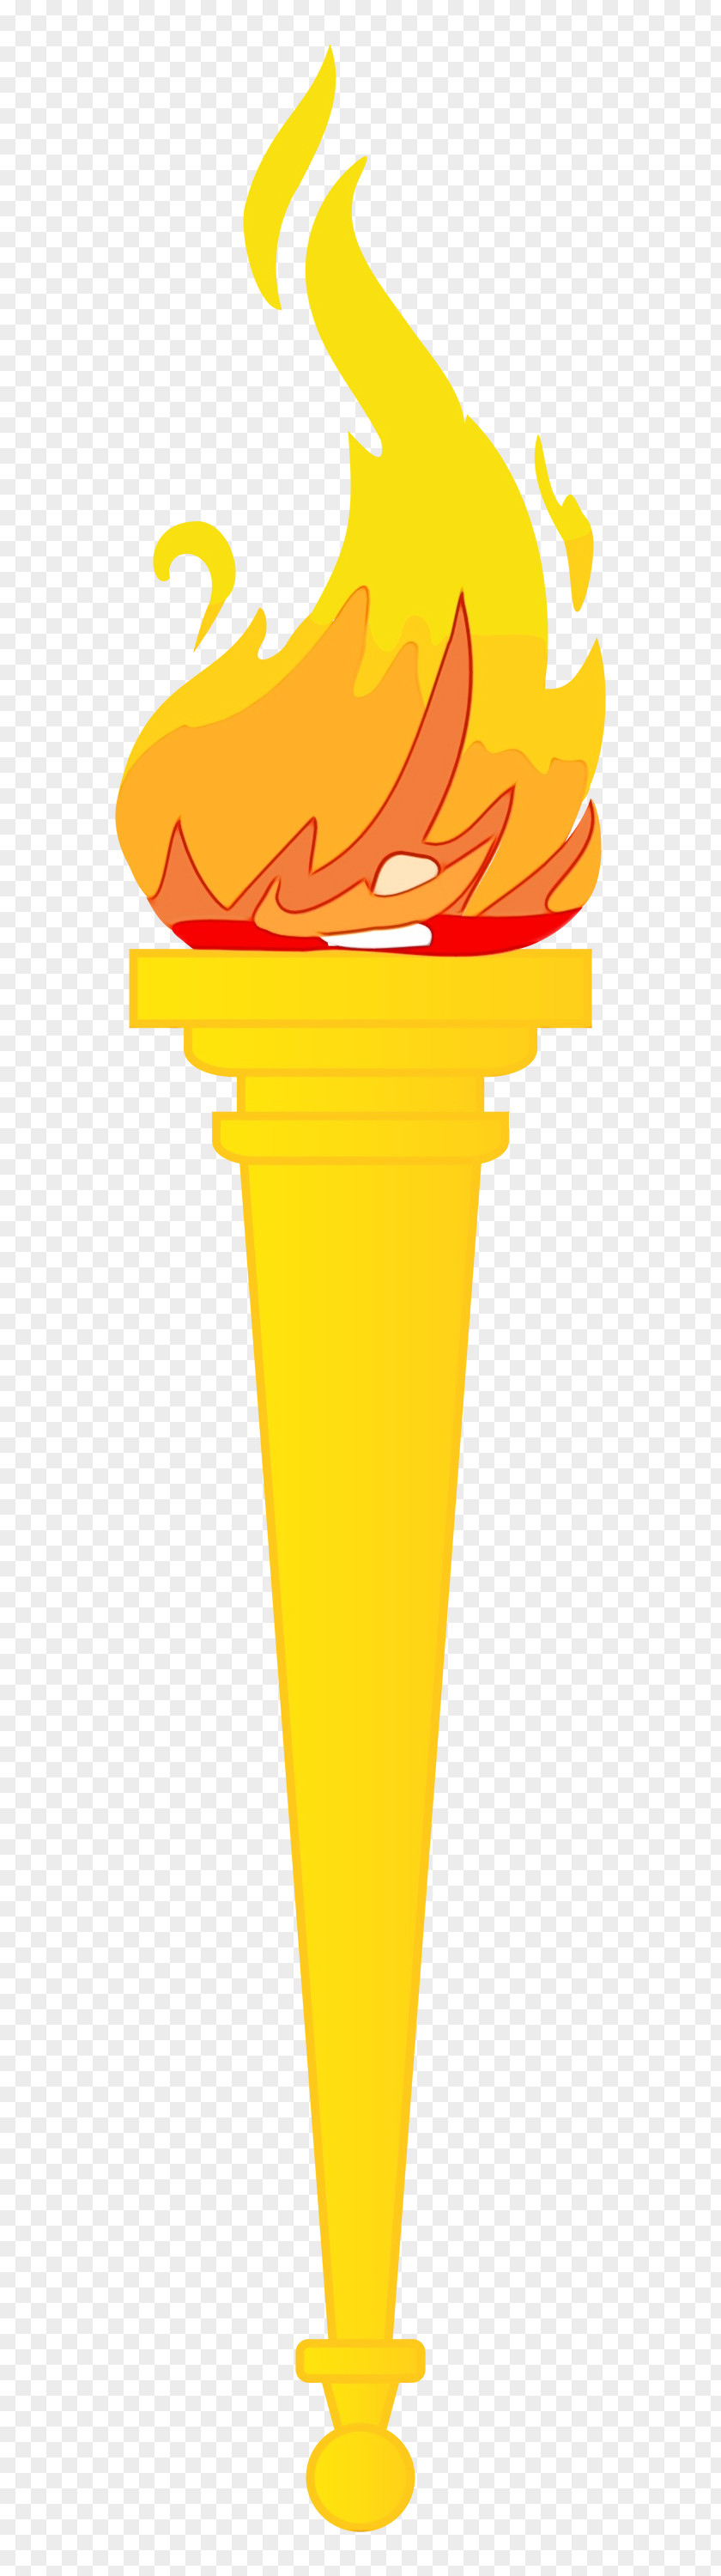 Cone Yellow Ice Cream Background PNG